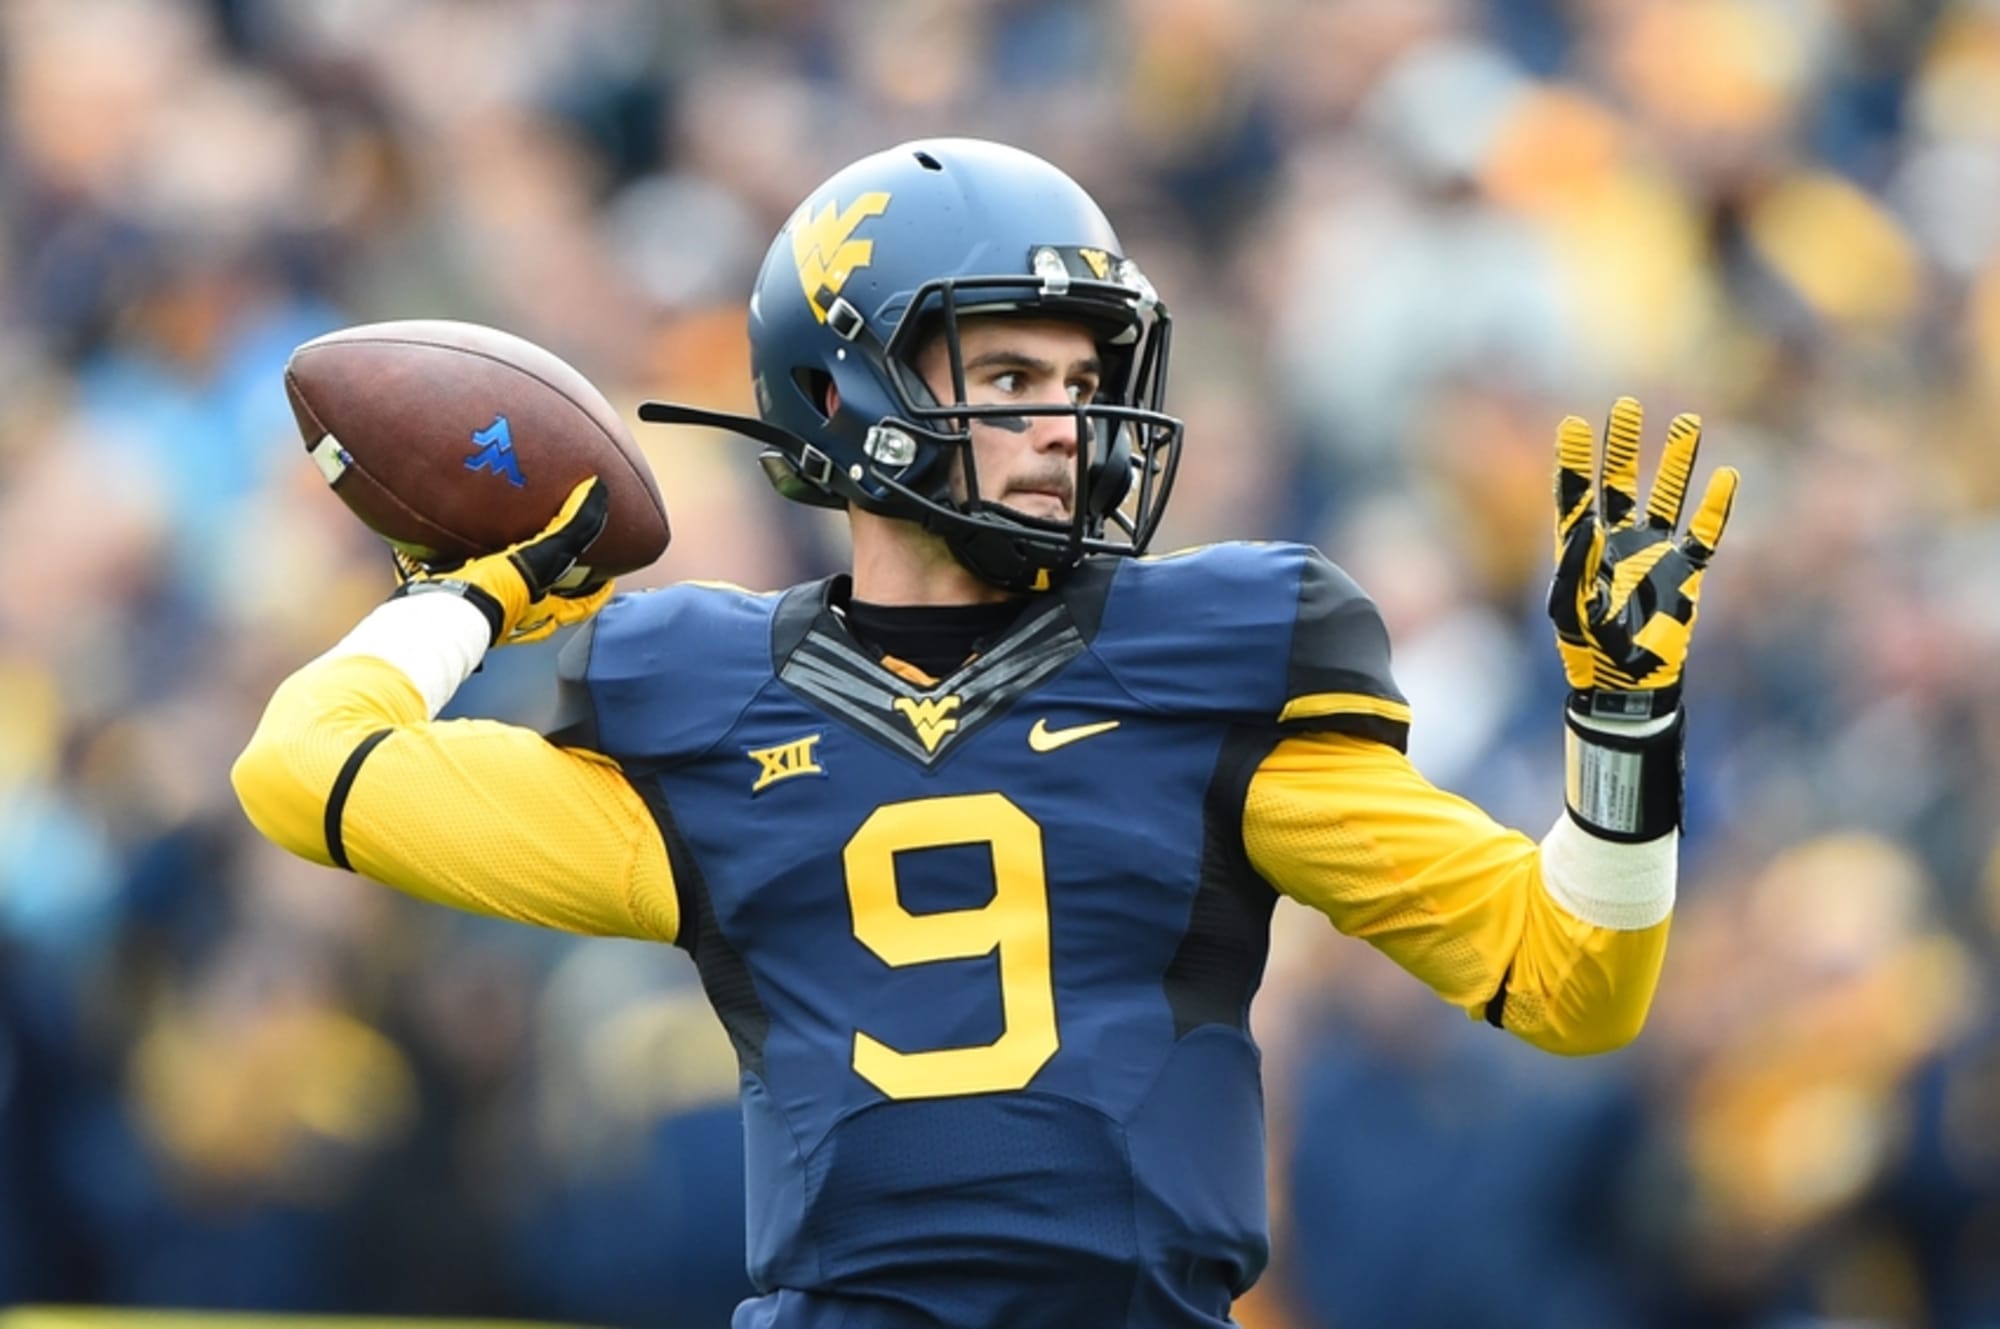 West Virginia QB Clint Trickett Retires From Football Due To Concussions